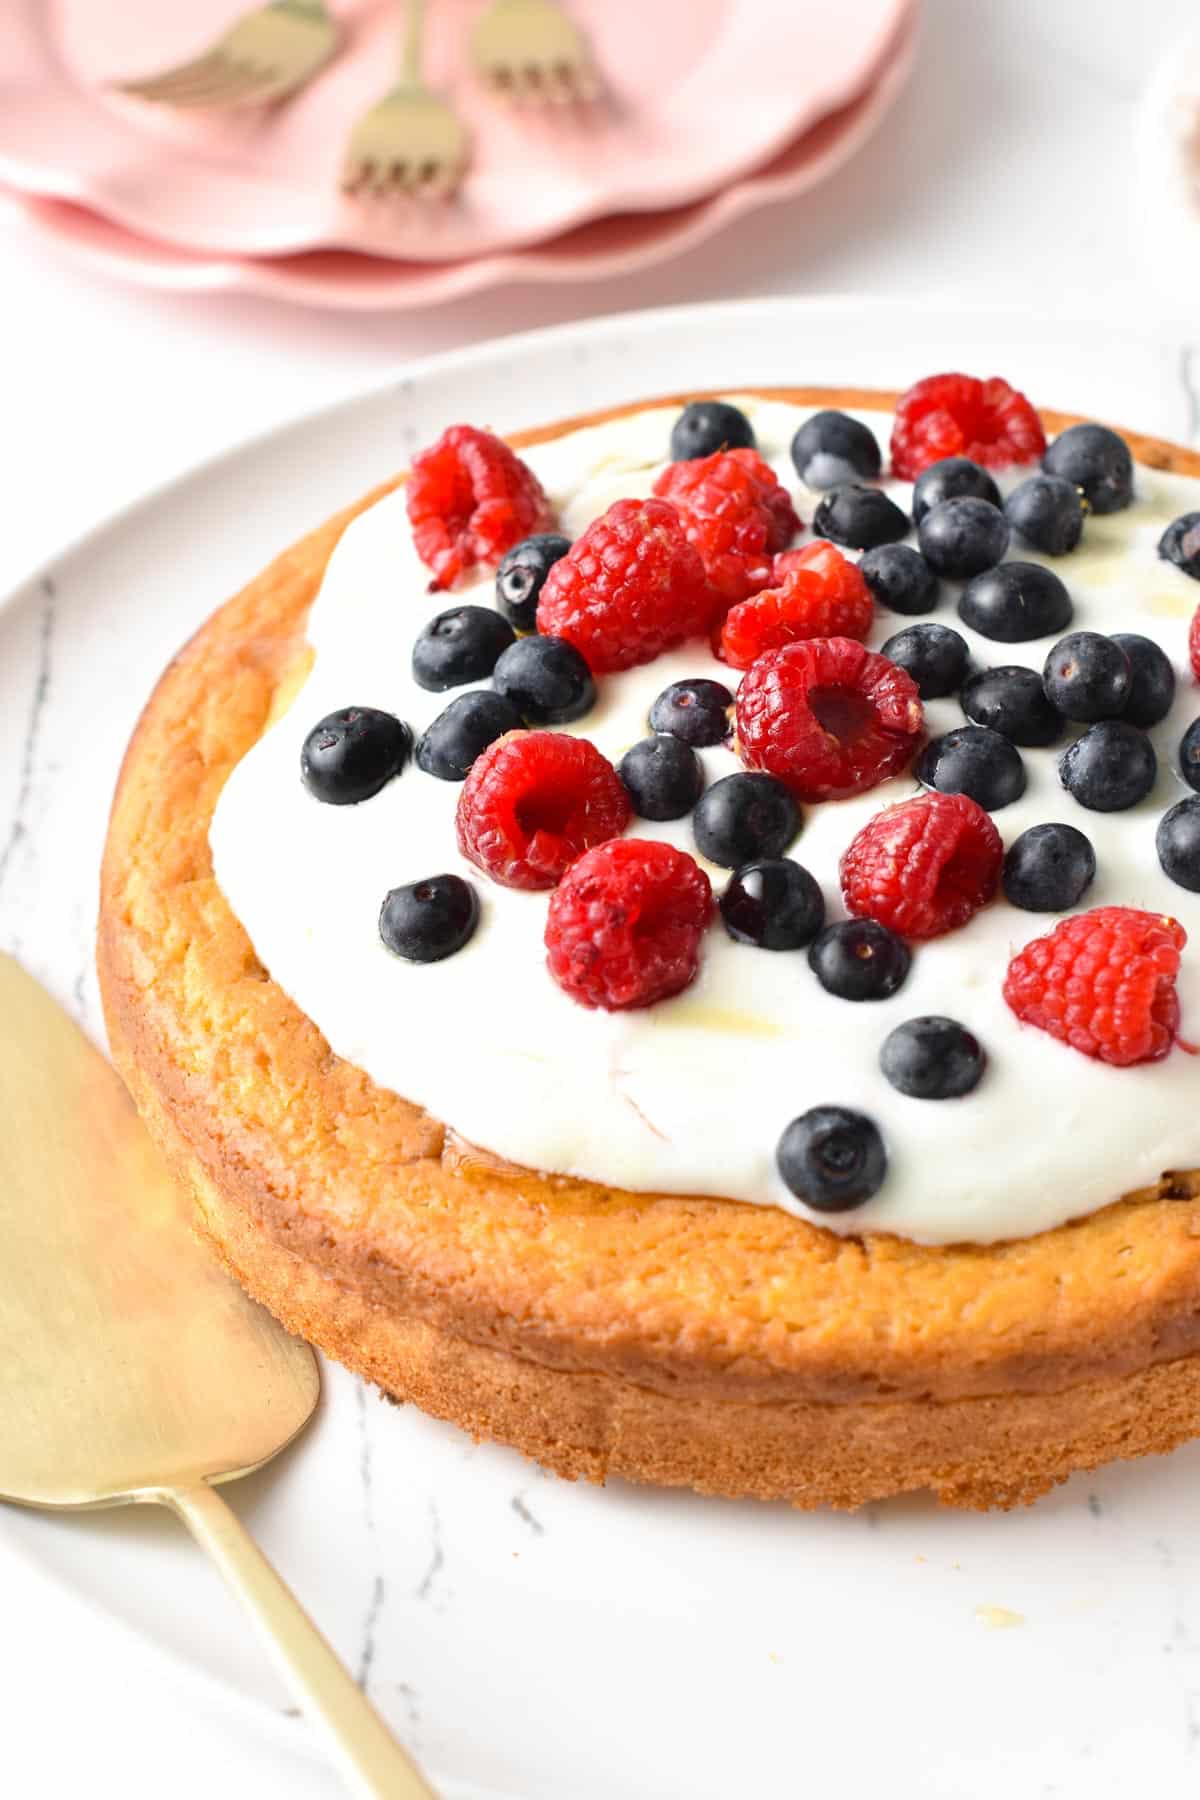 This sugar-free cake is a deliciously moist vanilla cake made with simple ingredients and with only 1 g of sugar per serve. Plus, this cake is also egg-free, dairy-free, and suitable for anyone.